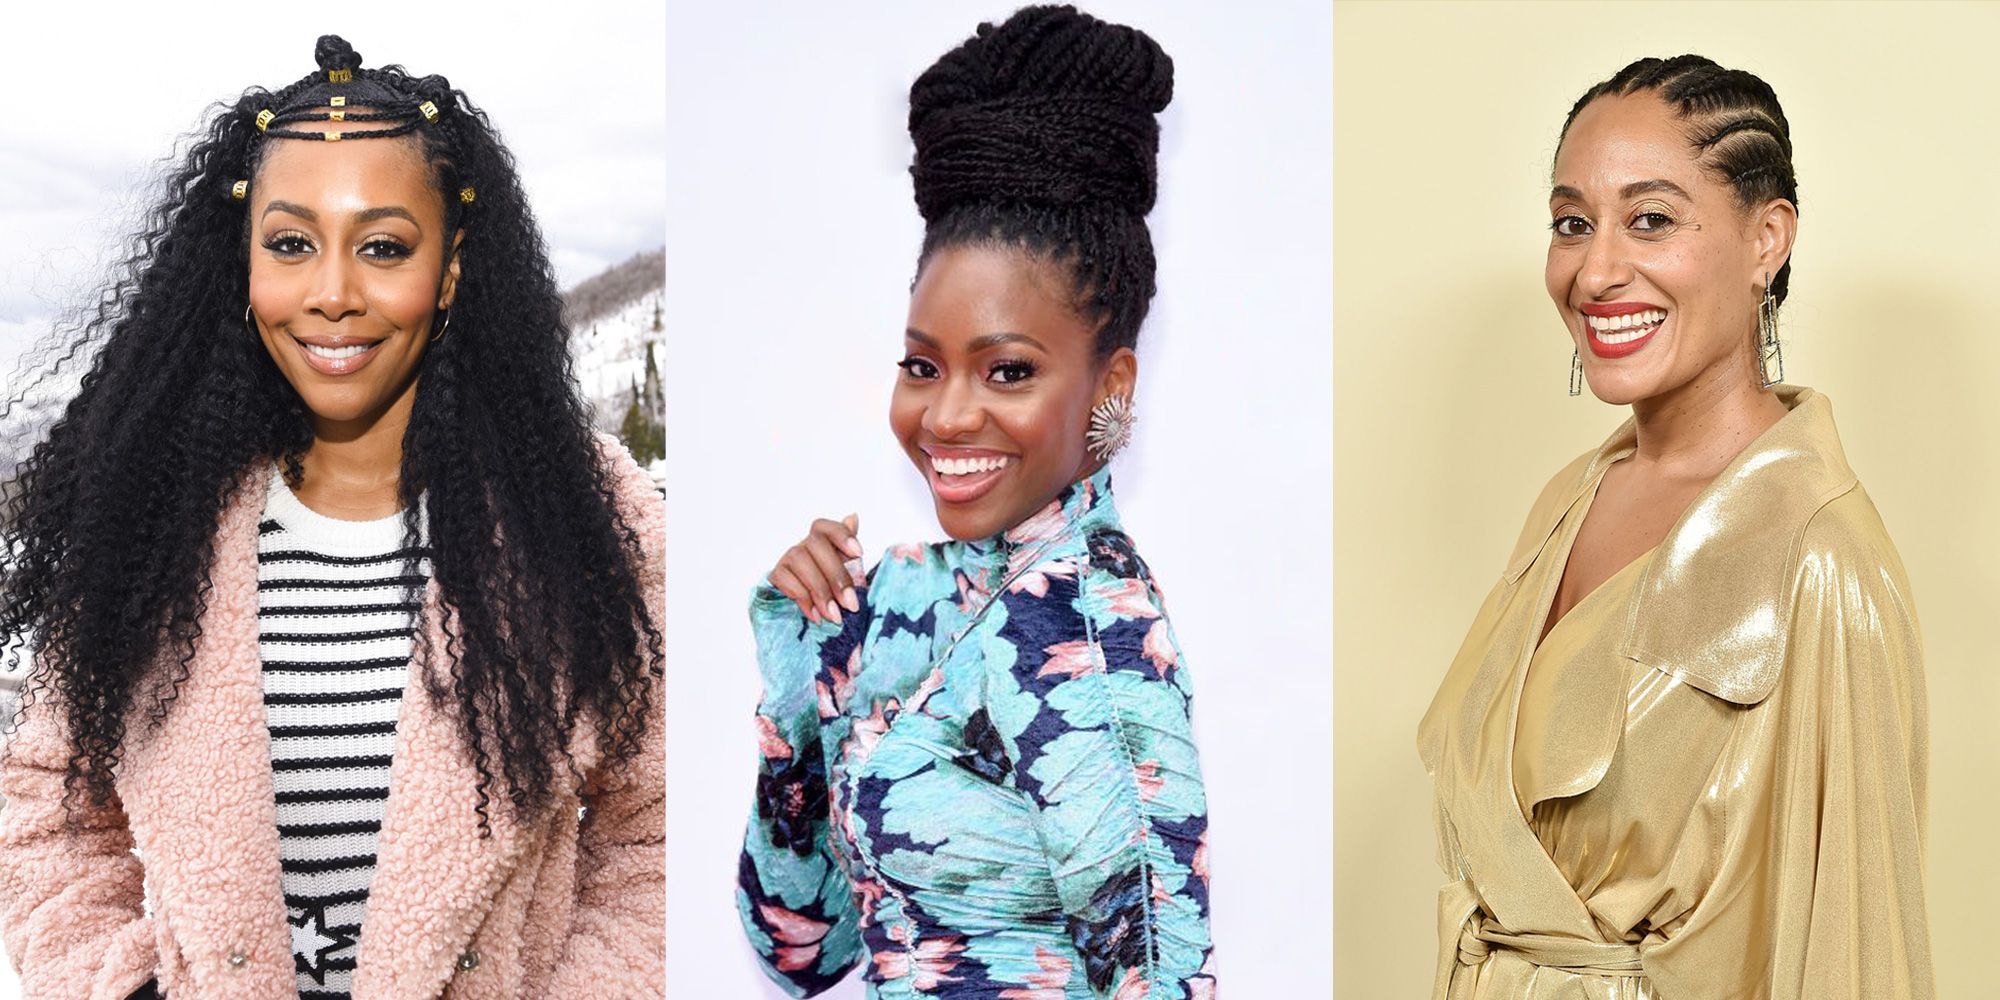 50+ cool braided hairstyles for black women to try in 2023 - Legit.ng